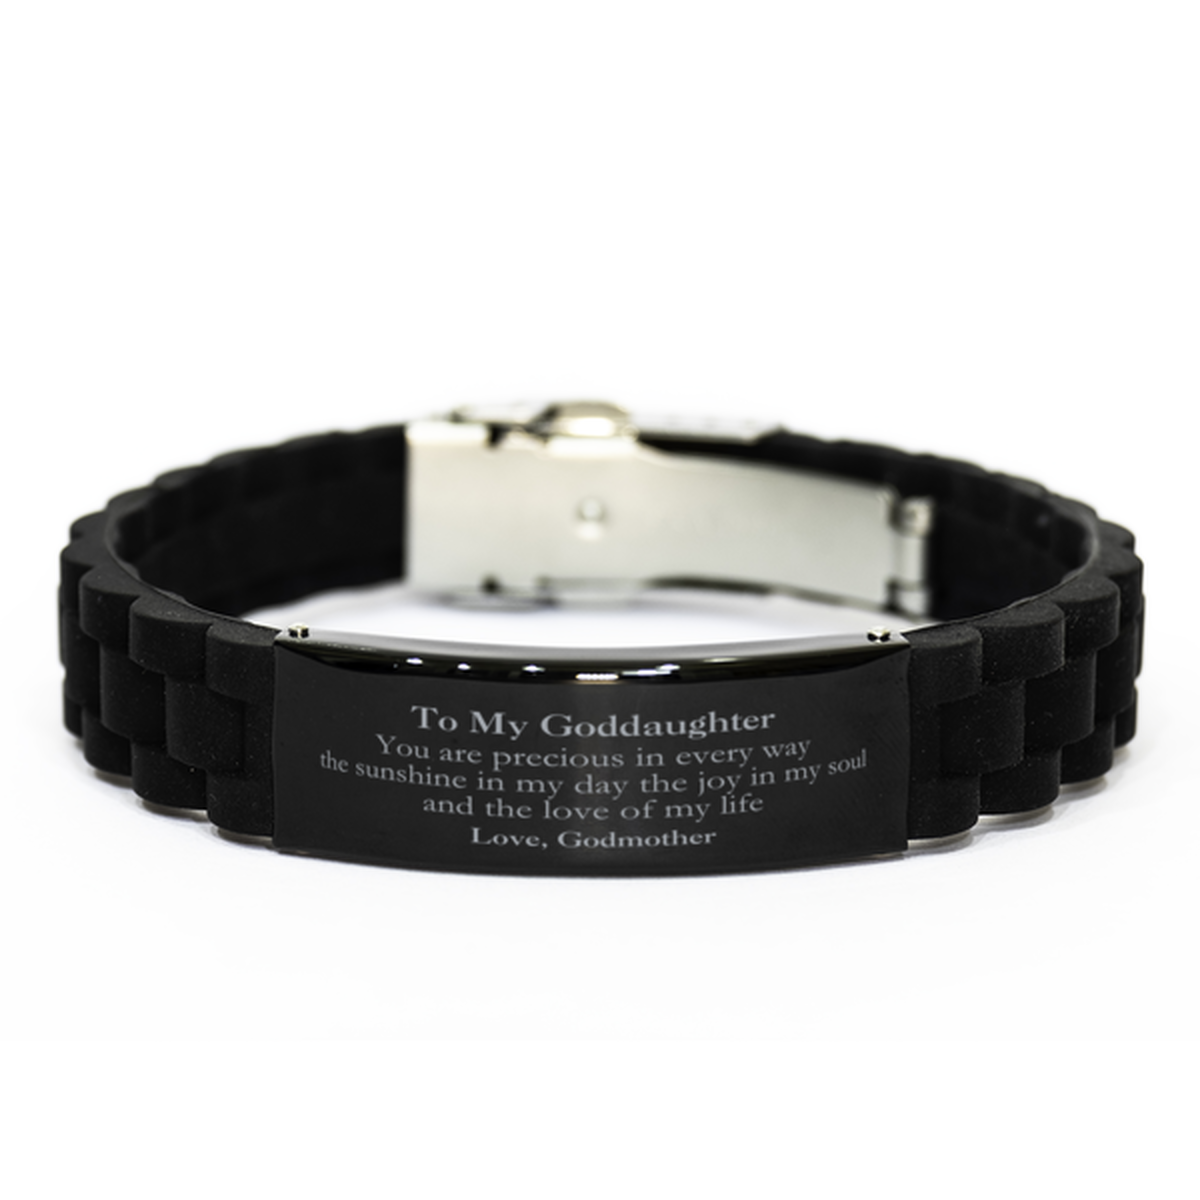 Graduation Gifts for Goddaughter Black Glidelock Clasp Bracelet Present from Godmother, Christmas Goddaughter Birthday Gifts Goddaughter You are precious in every way the sunshine in my day. Love, Godmother